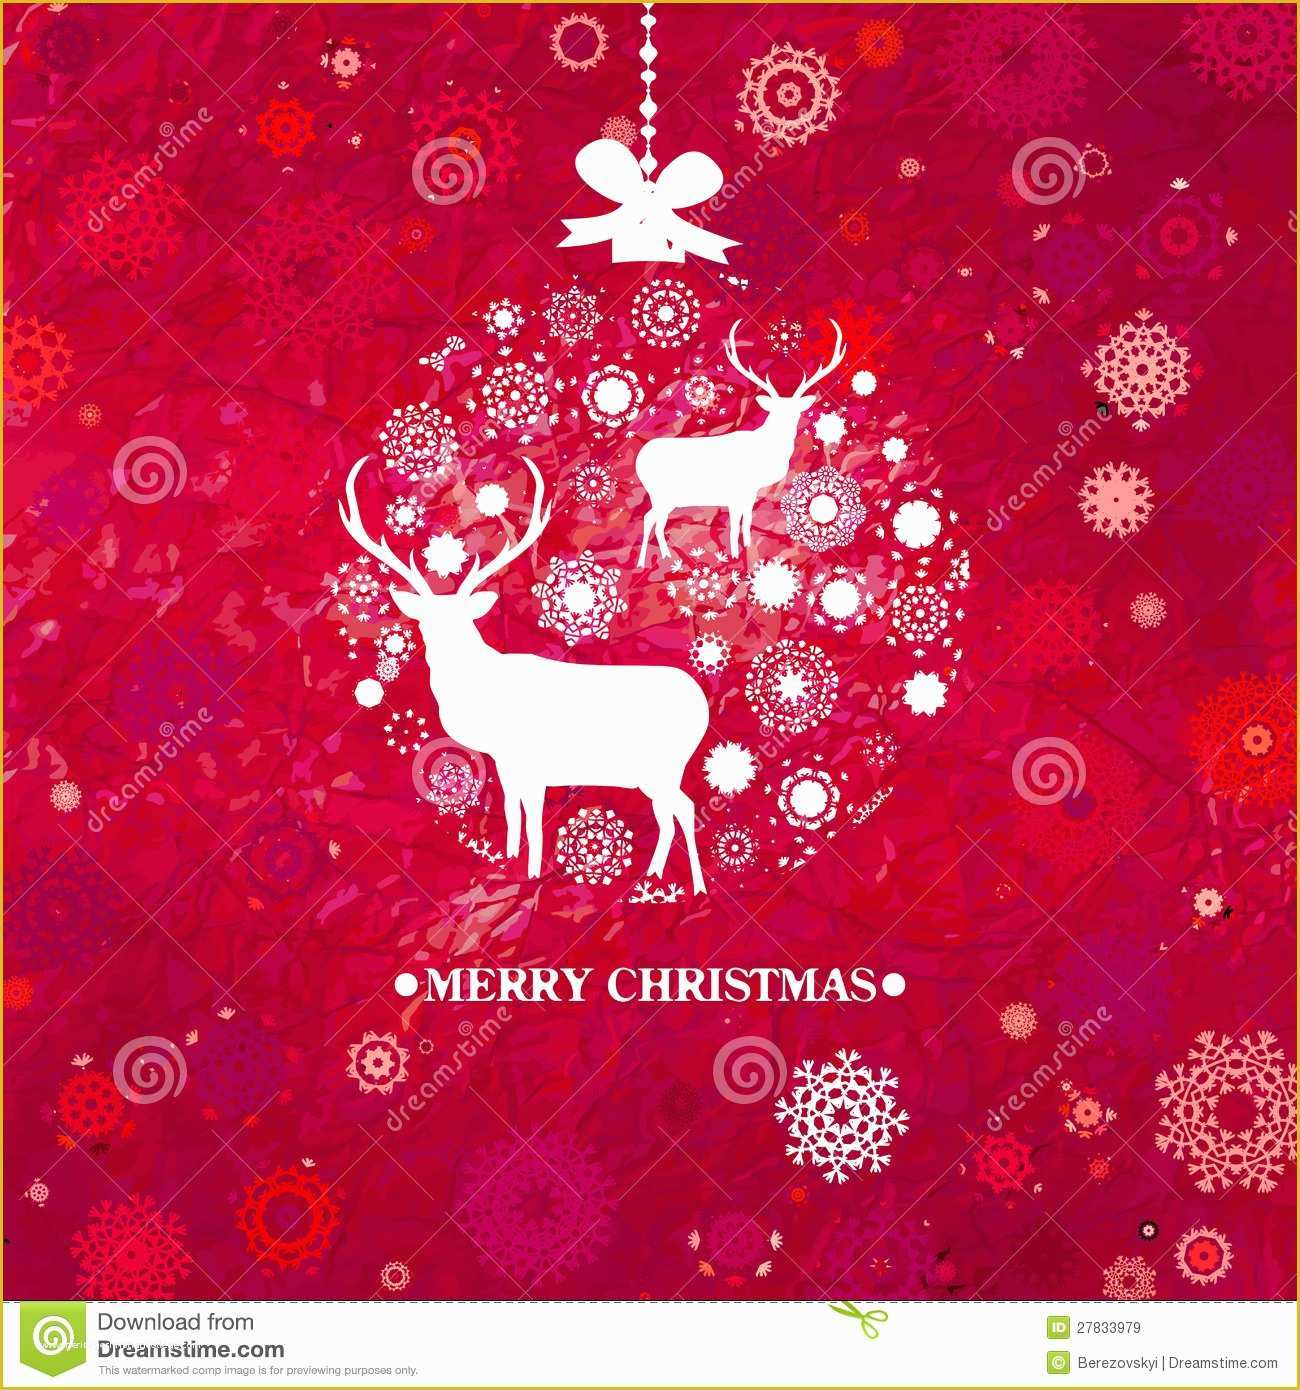 Free Picture Templates Of Christmas Invitation Card Template Eps 8 Stock Vector